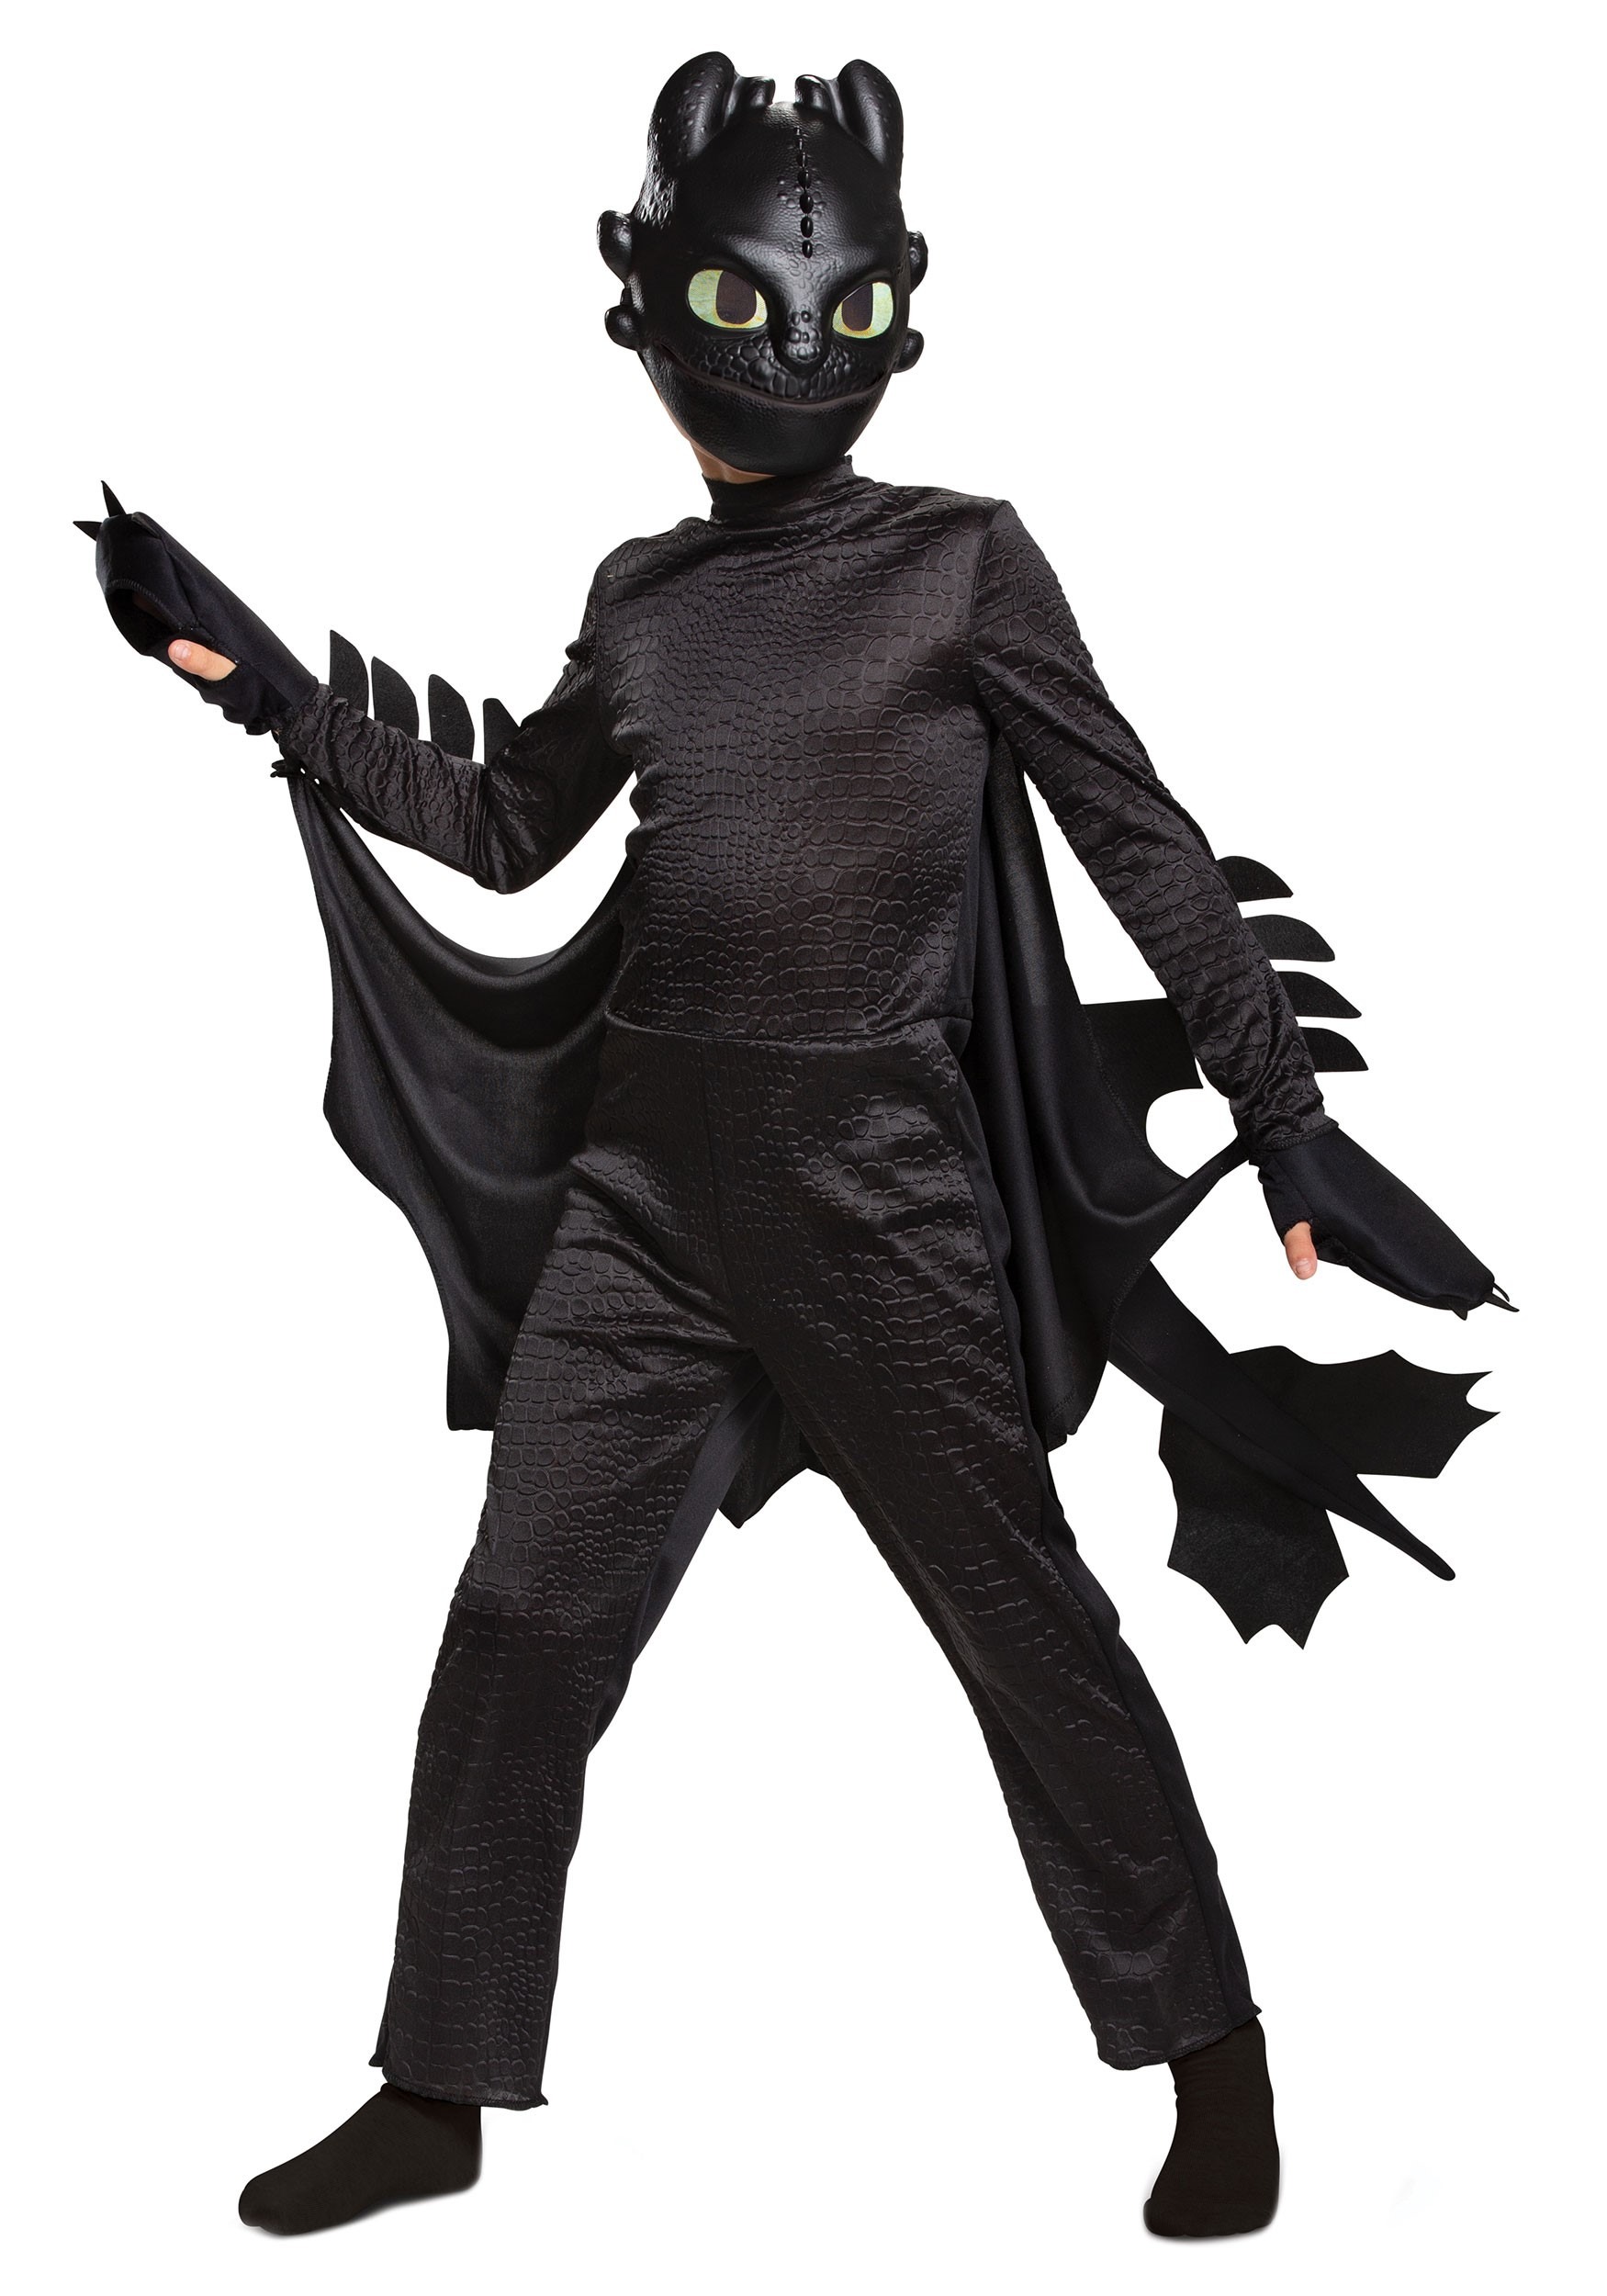 Image of Deluxe How to Train Your Dragon Toothless Costume for Kids ID DI87920-7/8